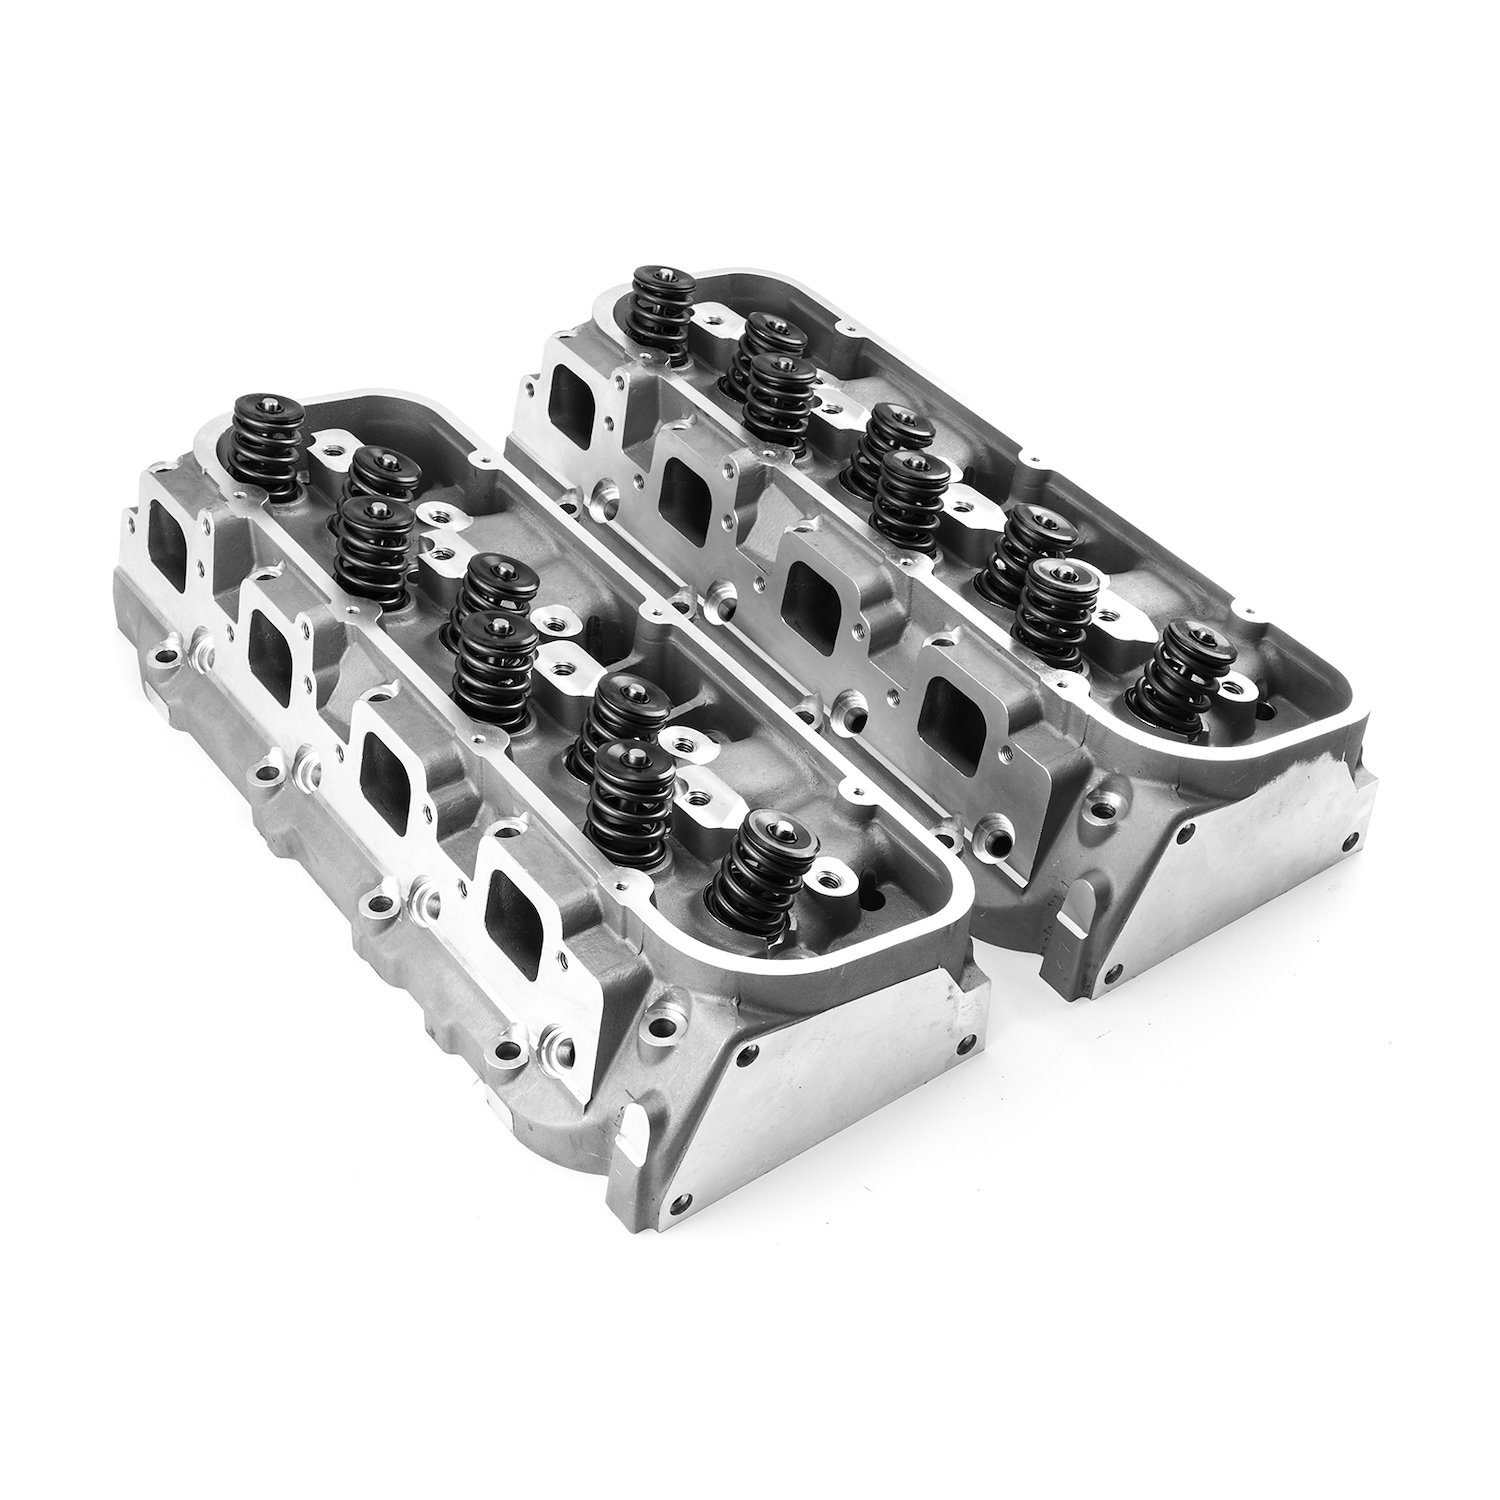 Big Block Chevy Aluminum Cylinder Heads 119cc / 320cc Solid Flat Tappet Complete Heads